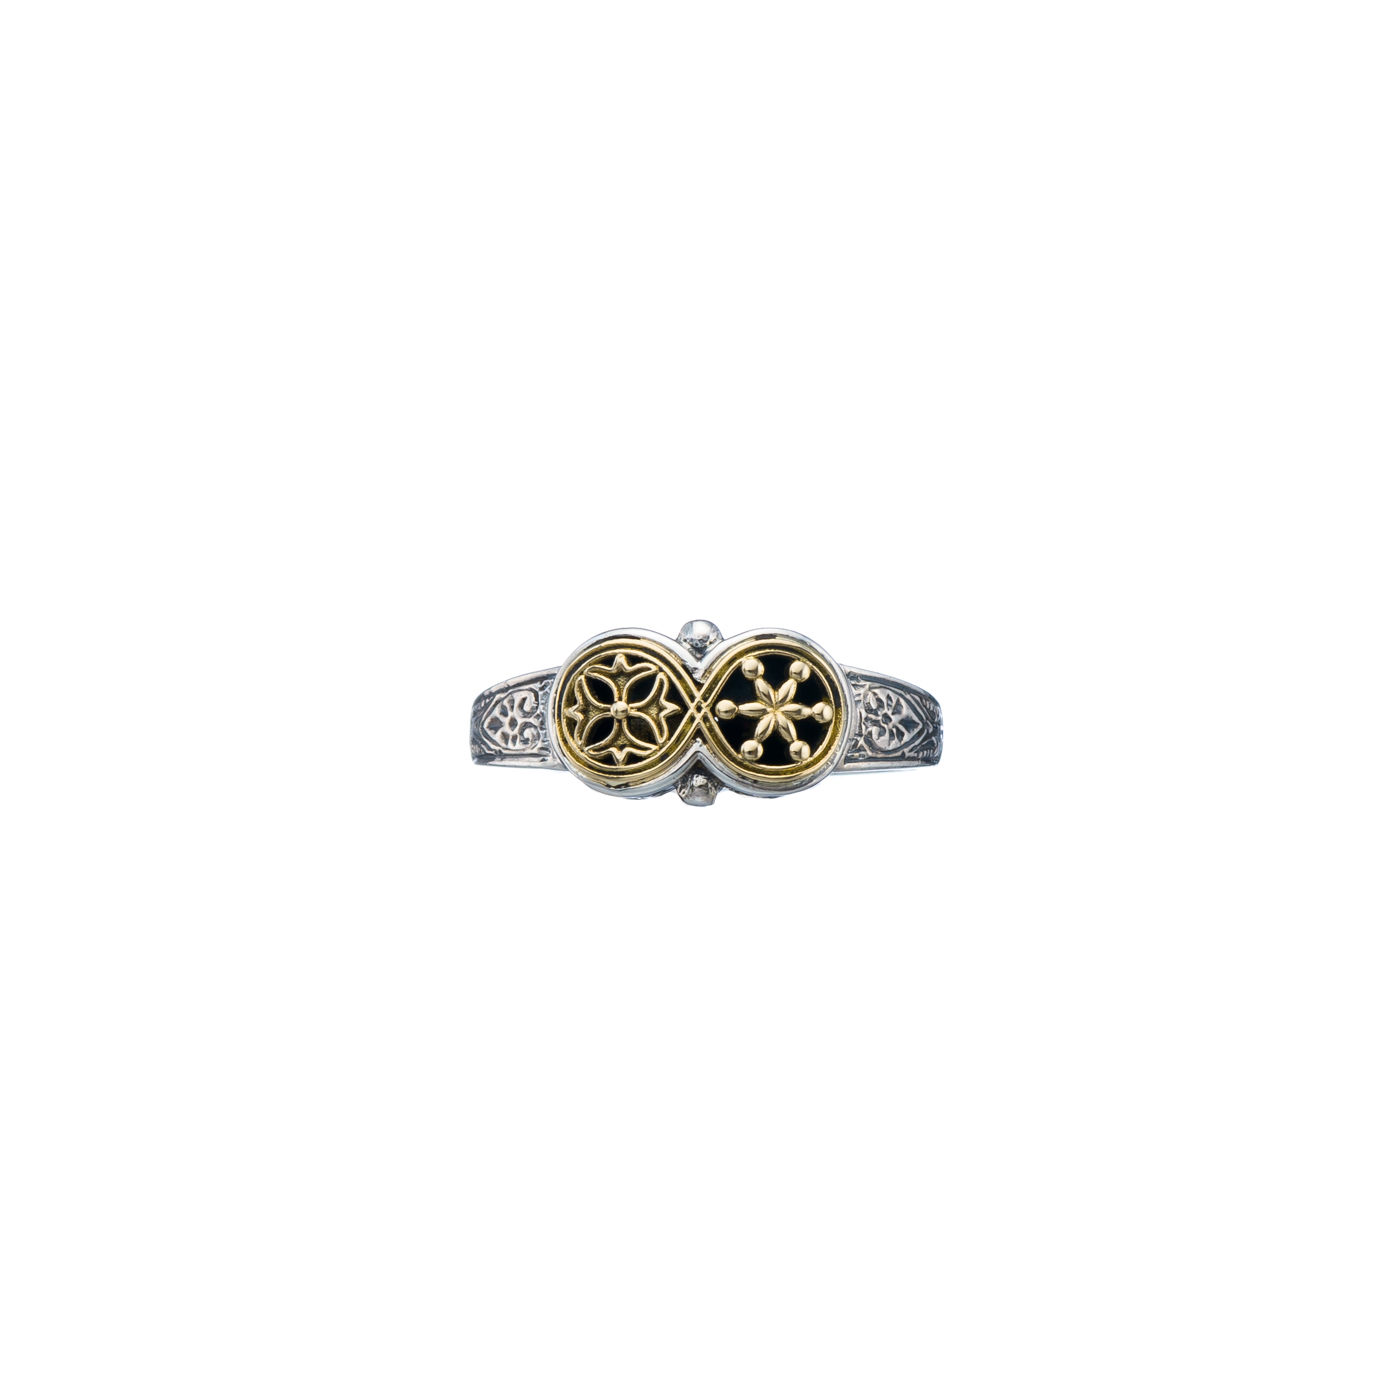 Symbol Infinity ring in 18K Gold and Sterling silver